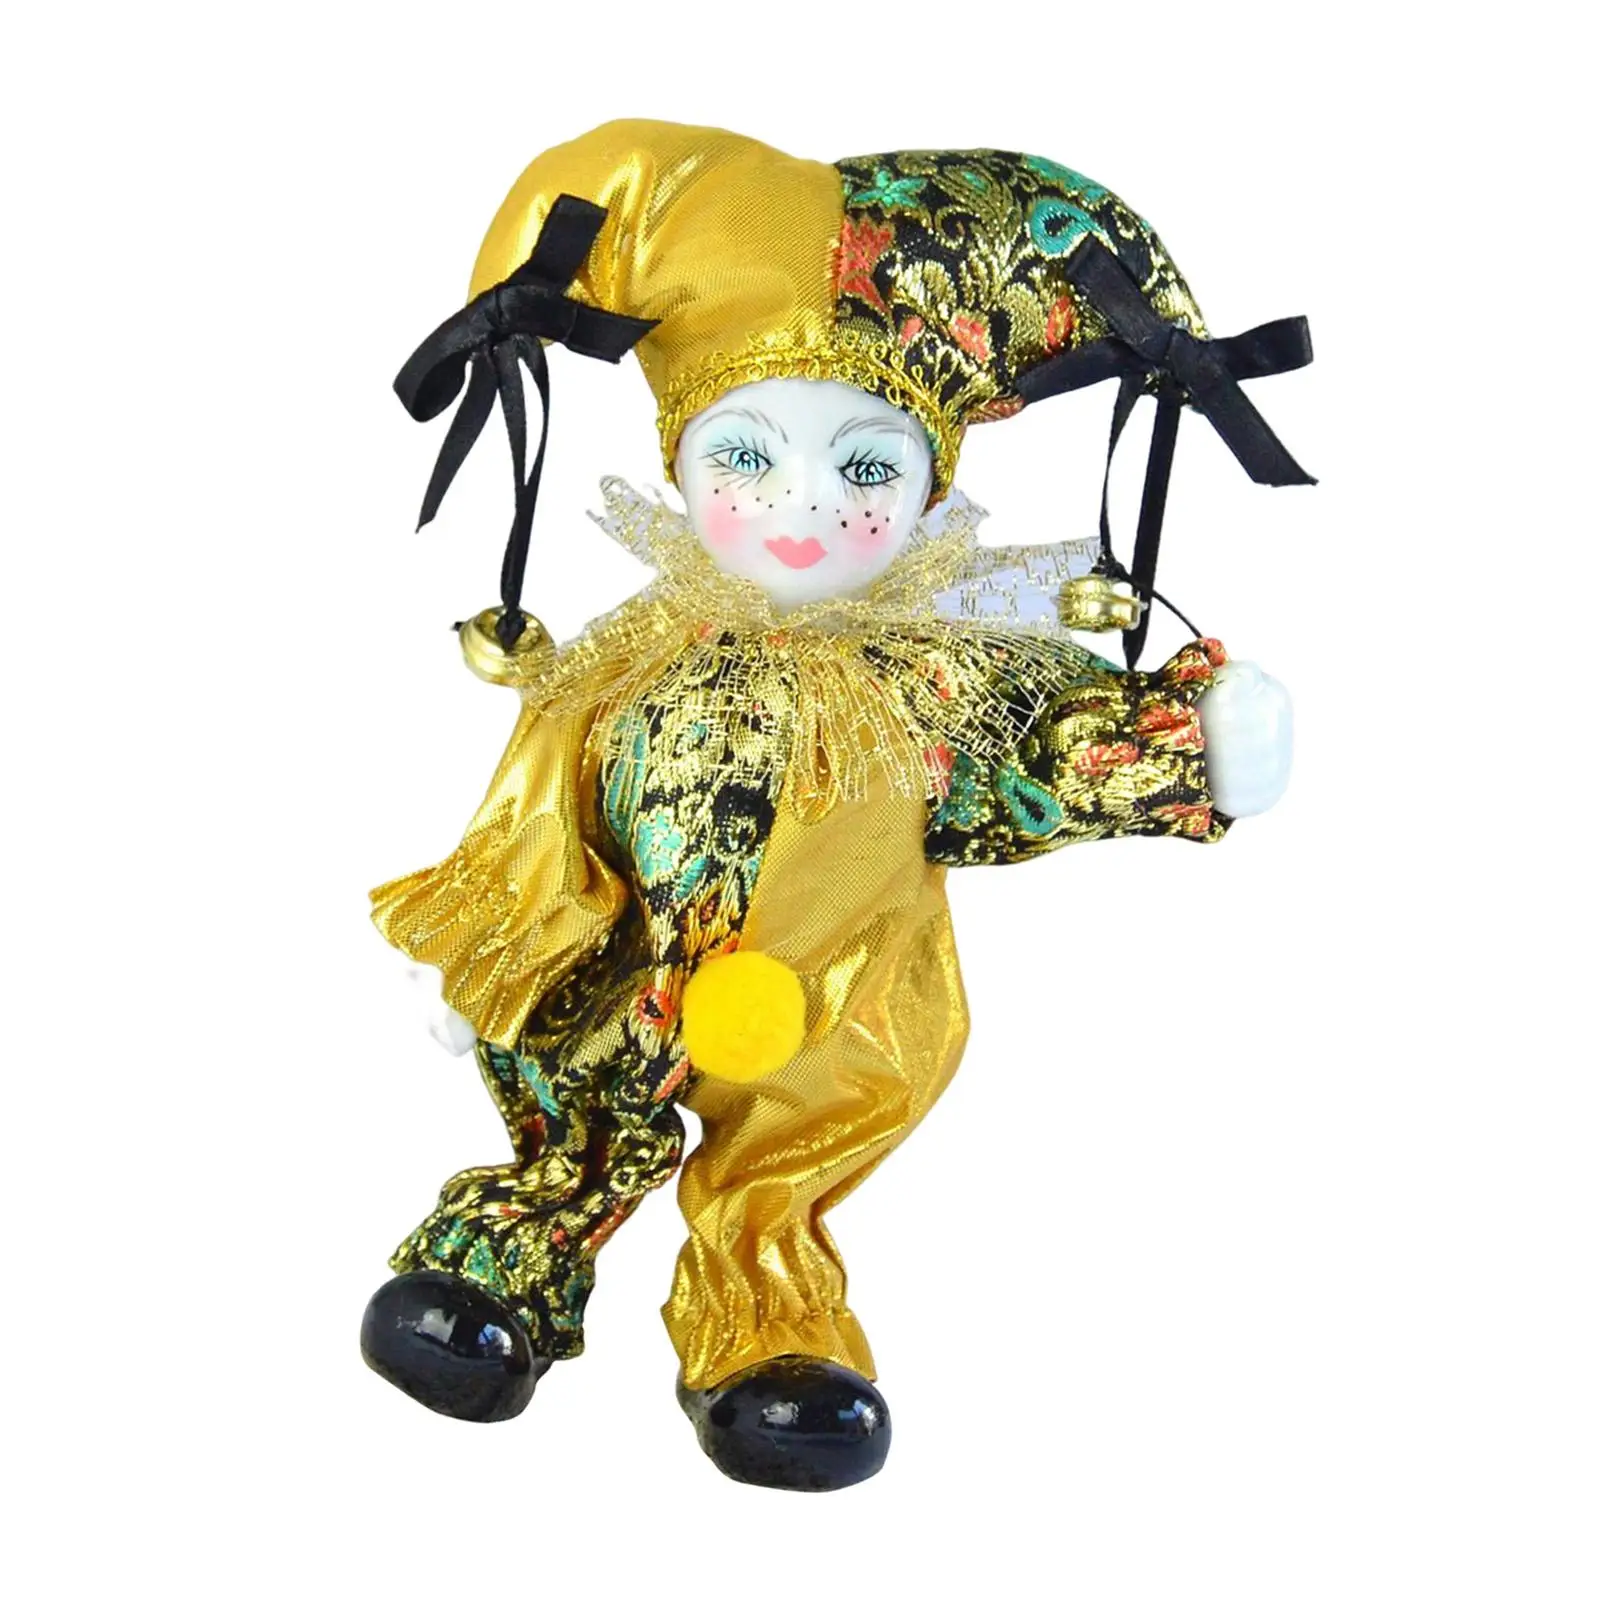 Triangel Doll with Outfits Small Clown Doll Arts for Kids Toy Valentin Gift